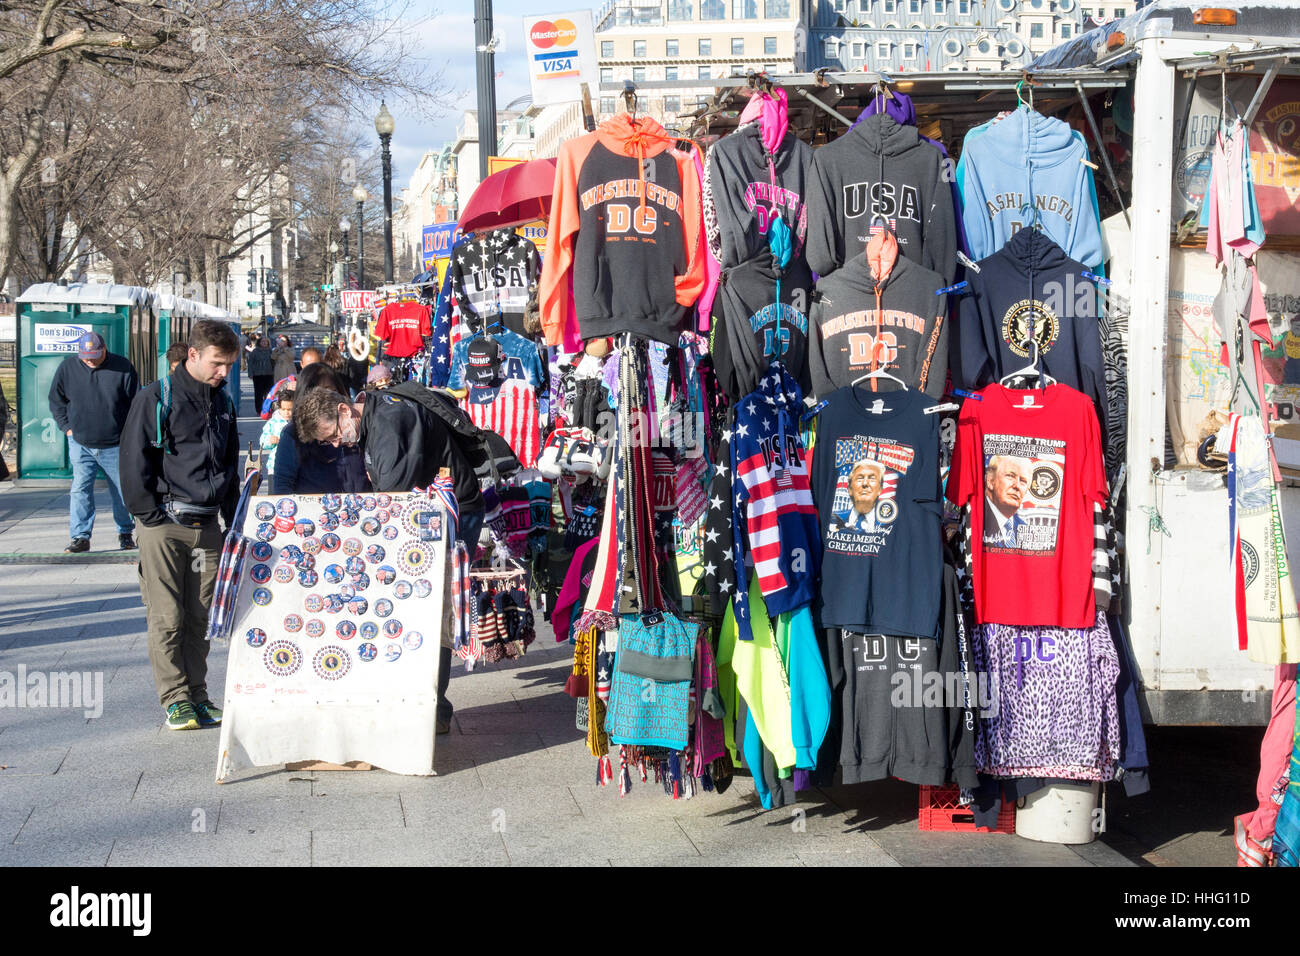 Washington DC, USA. 18th Jan, 2017. Near the White House in Washington, DC, street vendors sell buttons and clothing commemorating the inauguration of Donald Trump as 45th President. Credit: Tim Brown/Alamy Live News Stock Photo